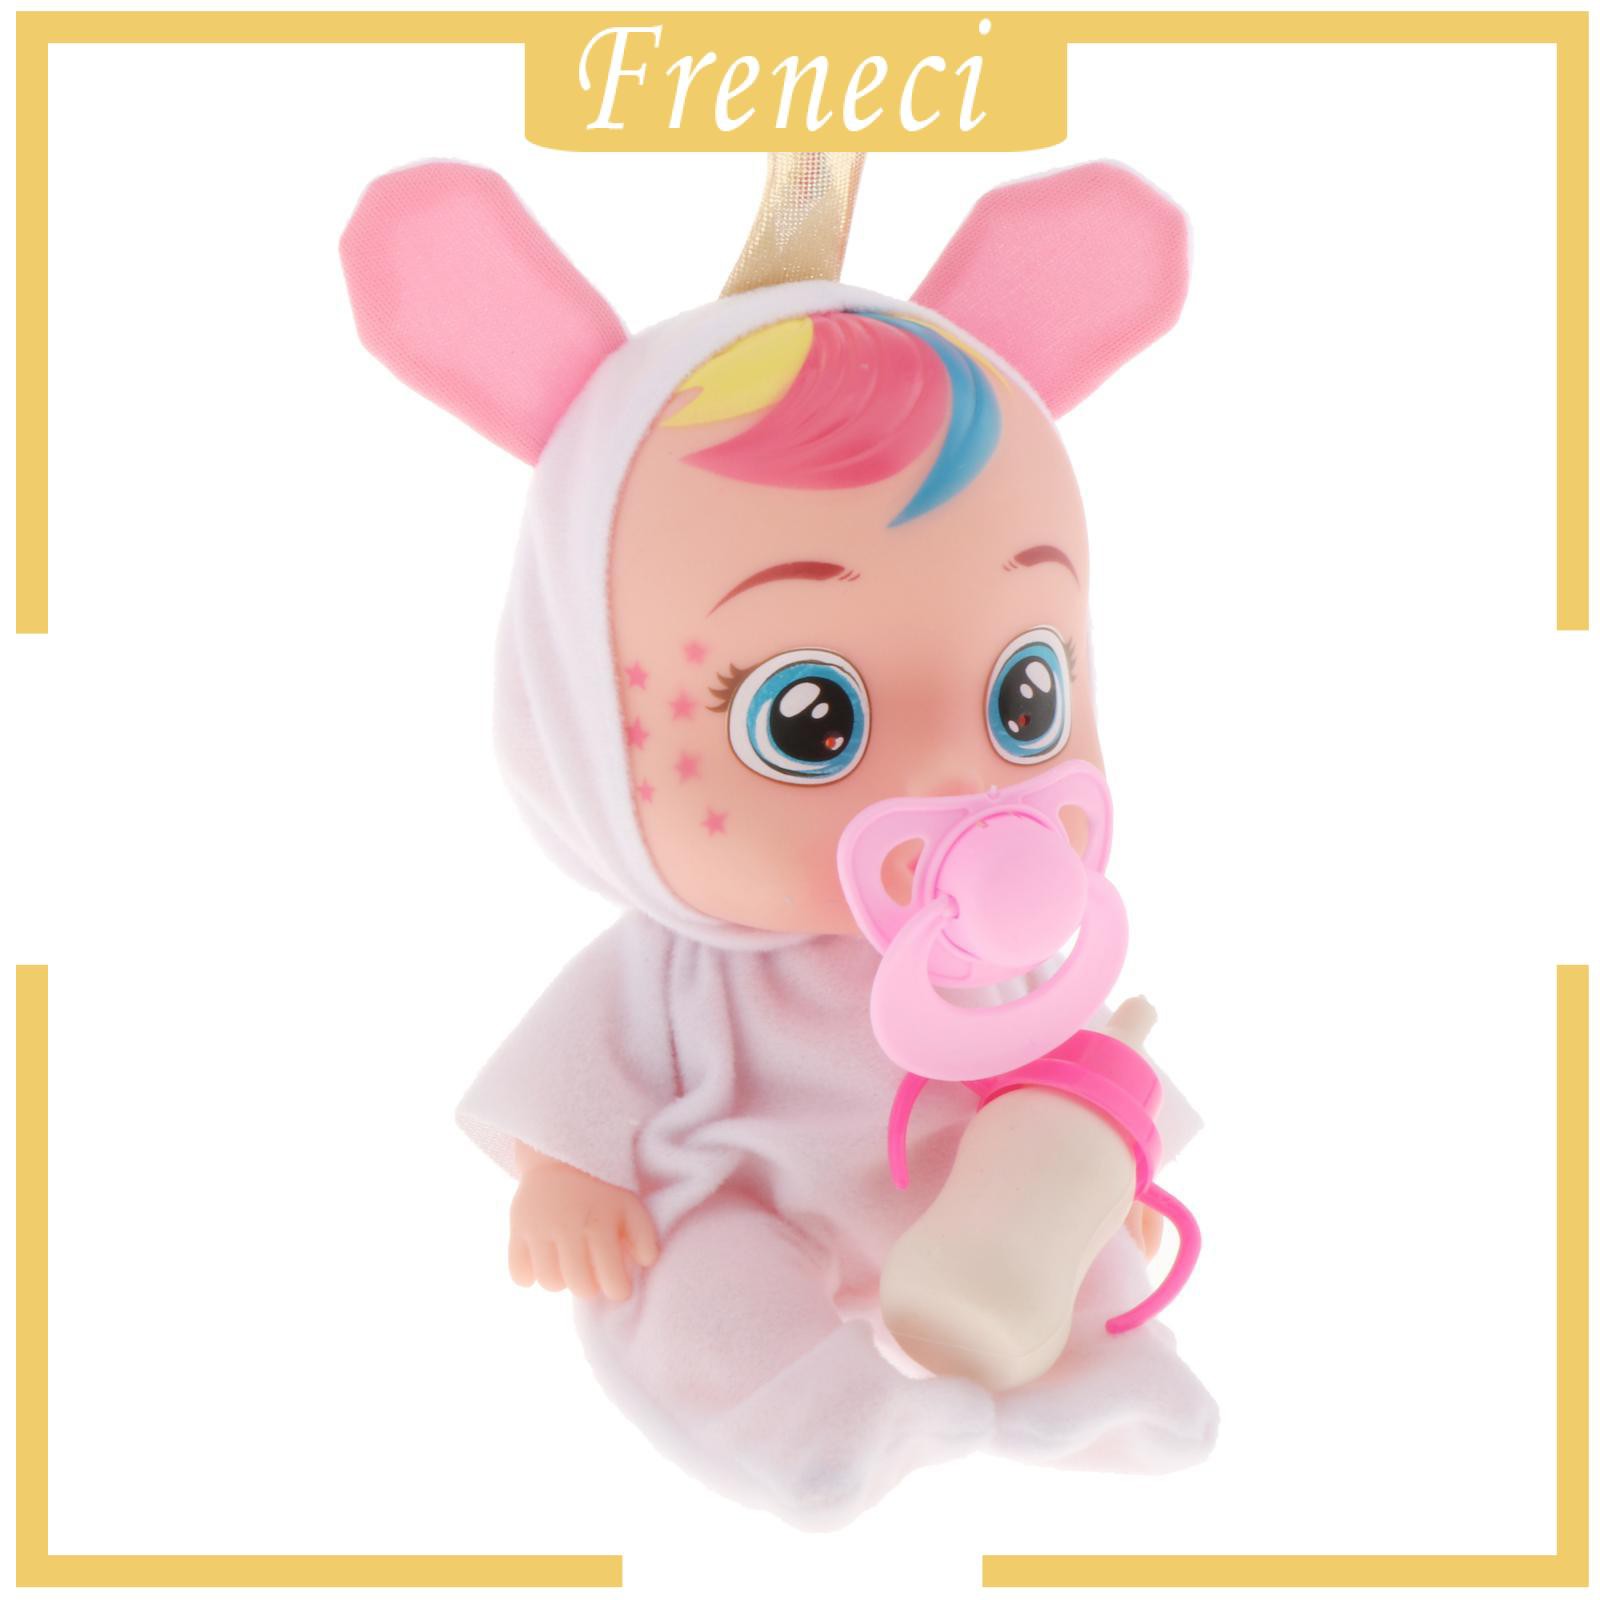 [FRENECI] Baby Alive Dolls Interactive Crying Baby Doll for Girls and Boys Aged 3 and Up Birthday Gift Interactive Dolls Toys